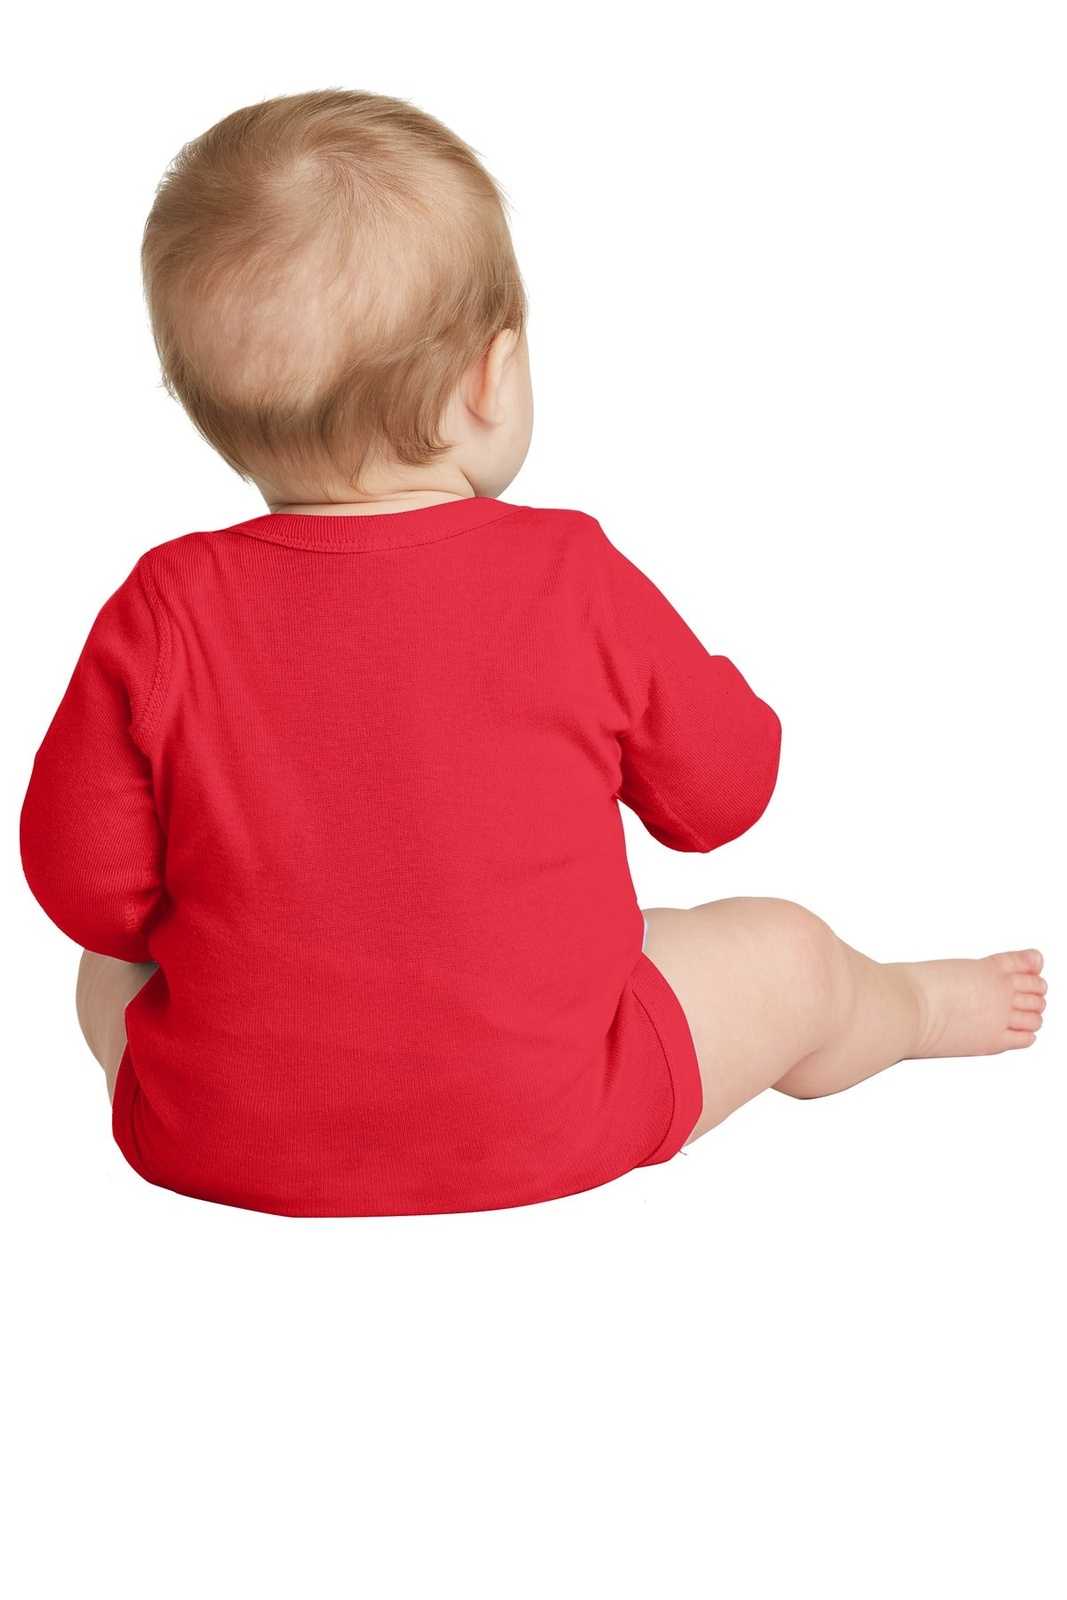 Rabbit Skins 4411 Infant Long Sleeve Baby Rib Bodysuit - Red - HIT a Double